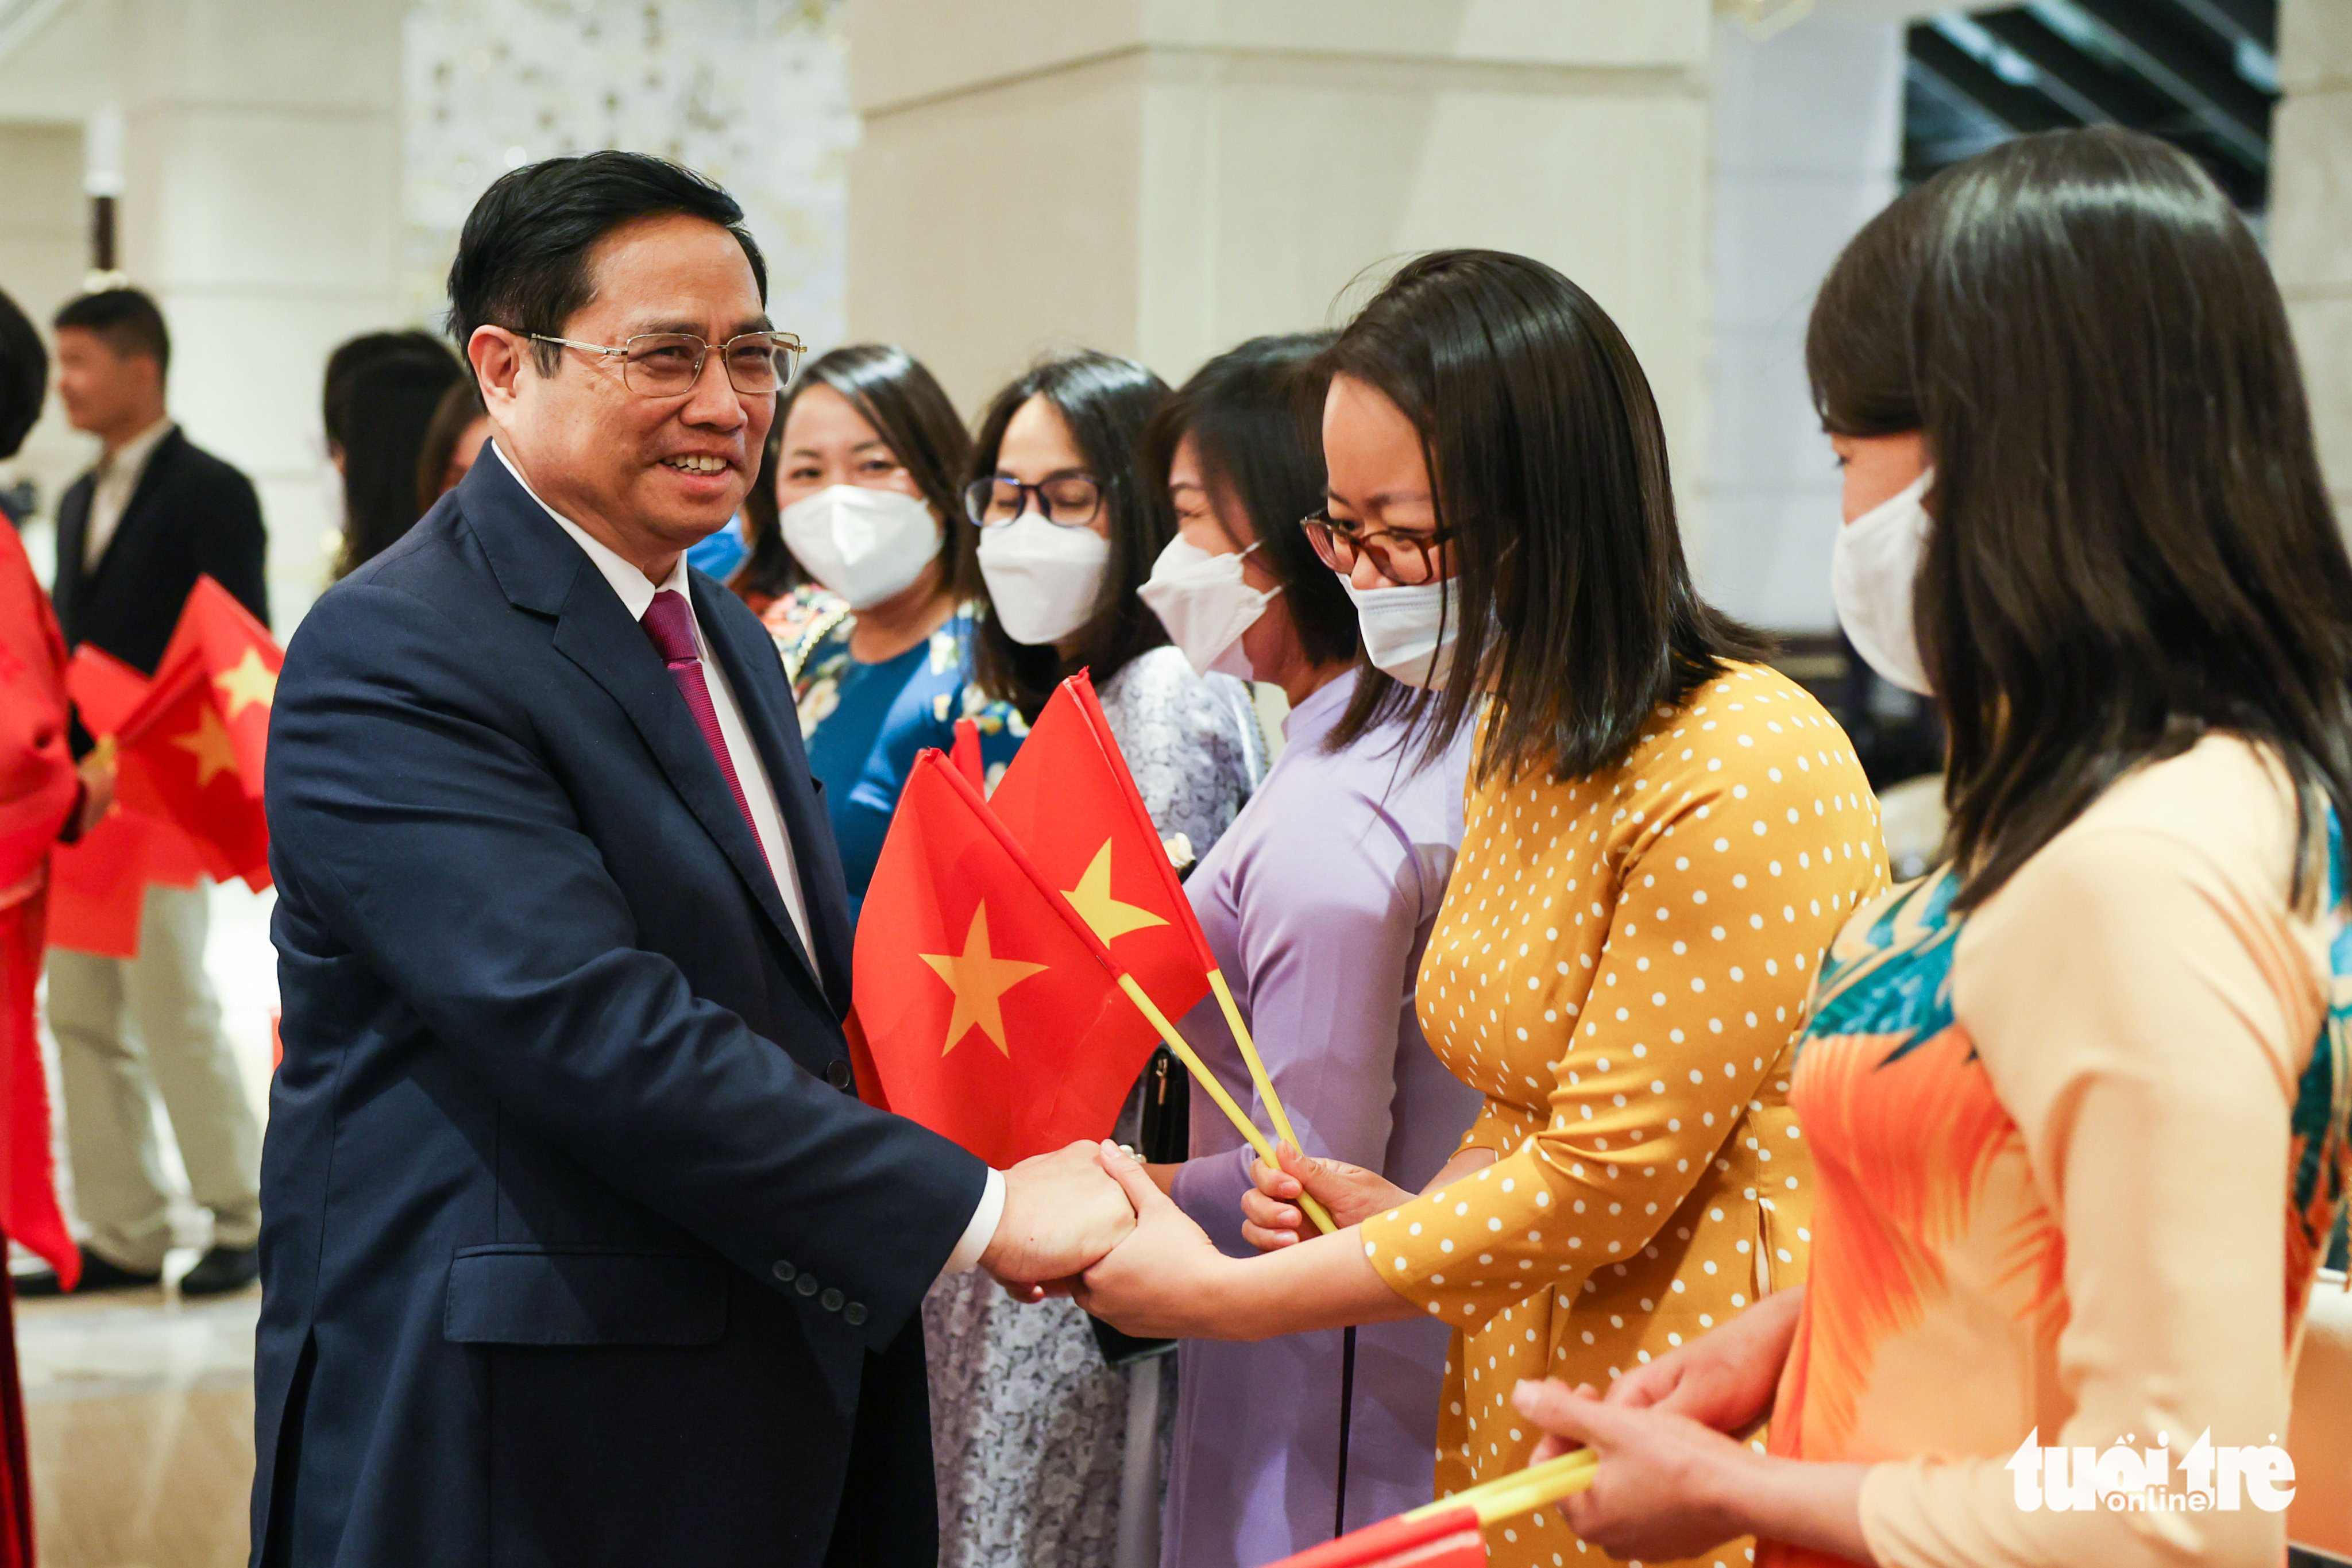 Vietnamese Prime Minister Pham Minh Chinh is welcomed by members of the Embassy of Vietnam in the U.S. in Washington D.C., May 11, 2022. Photo: Nguyen Khanh / Tuoi Tre